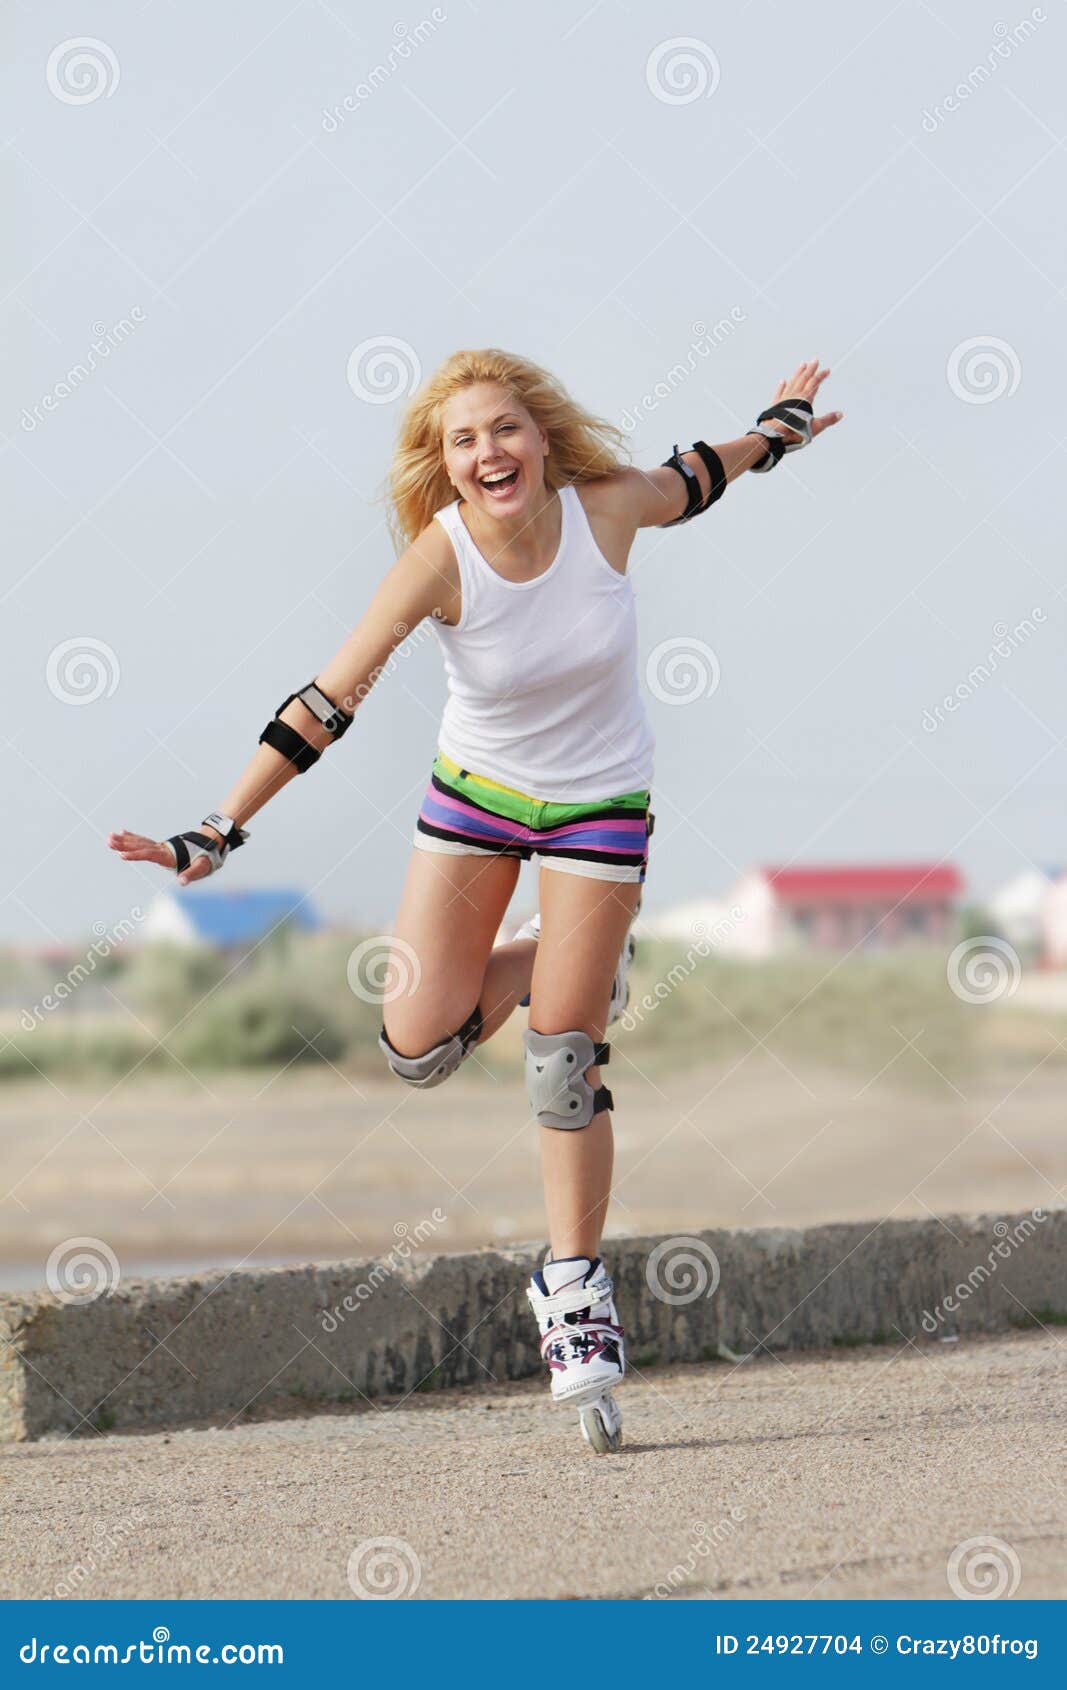 Girl Roller Skating In Park Stock Image - Image of leisure 